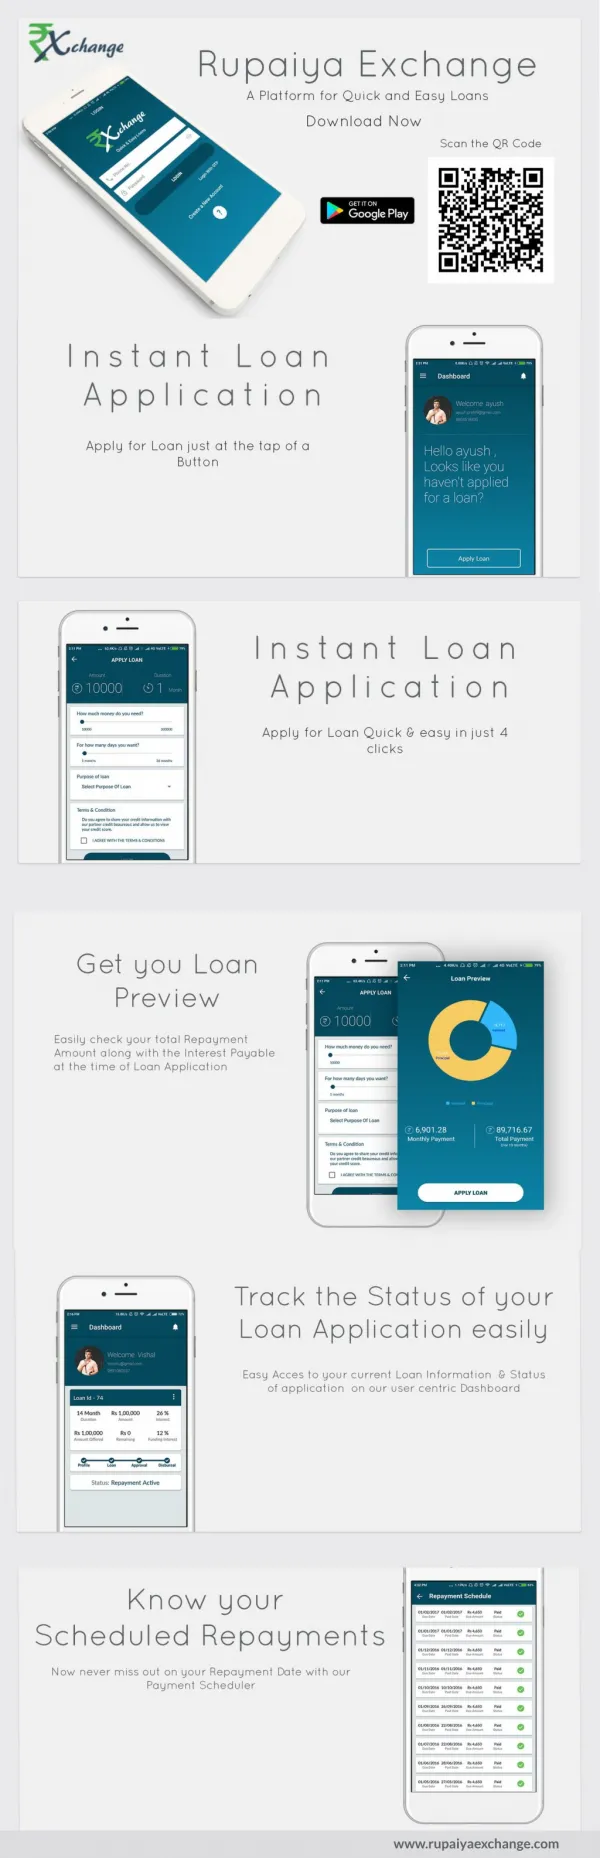 Rupaiya Exchange: Quick and Easy Loans - Android Apps on Google Play